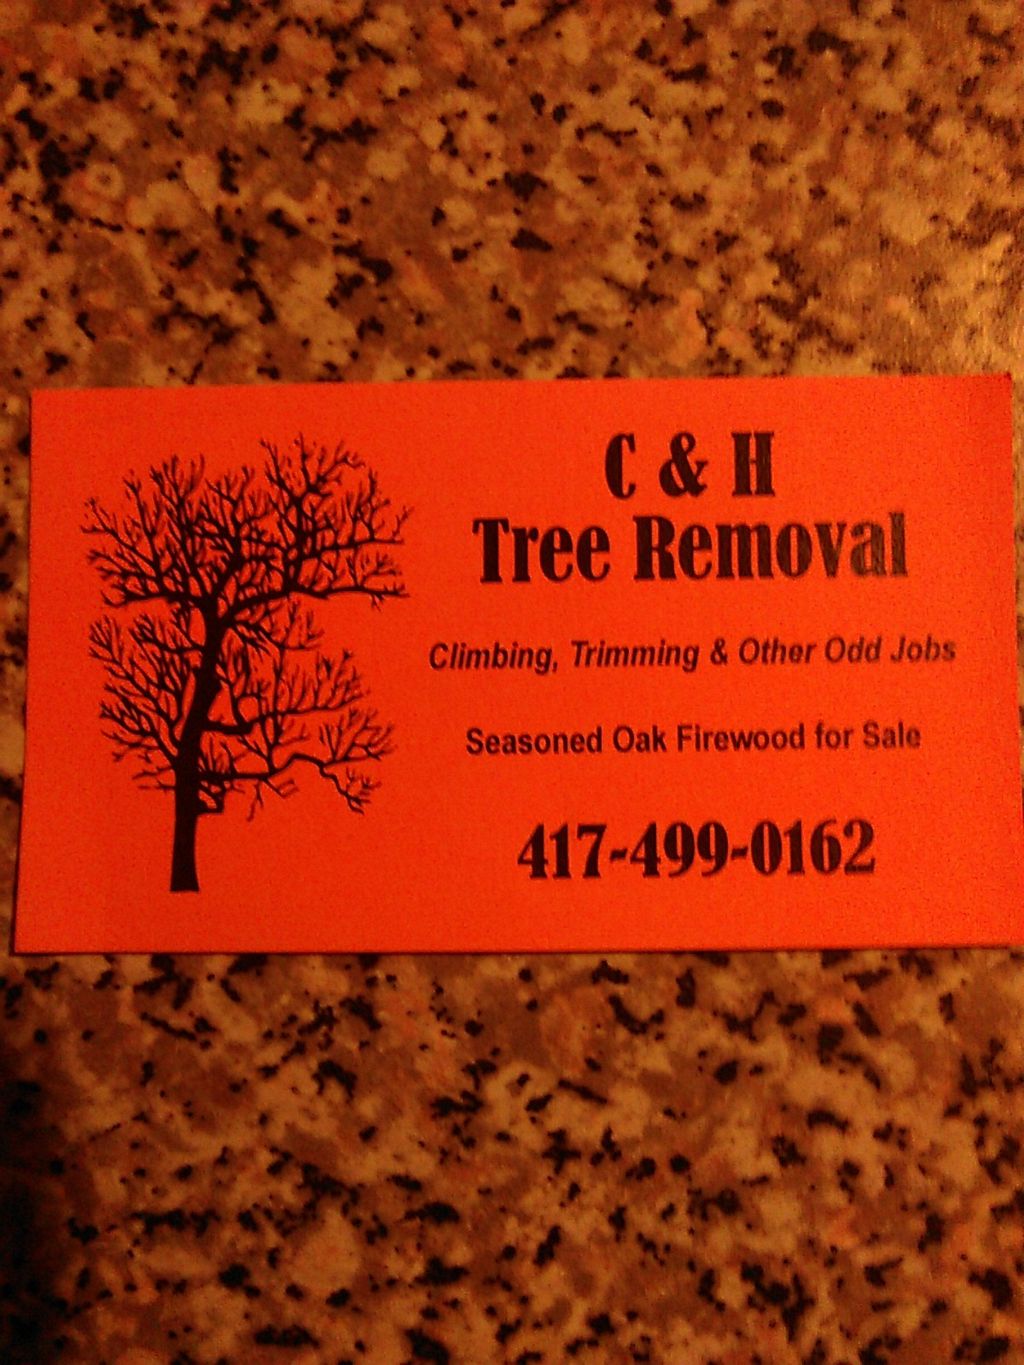 C&H Tree Removal